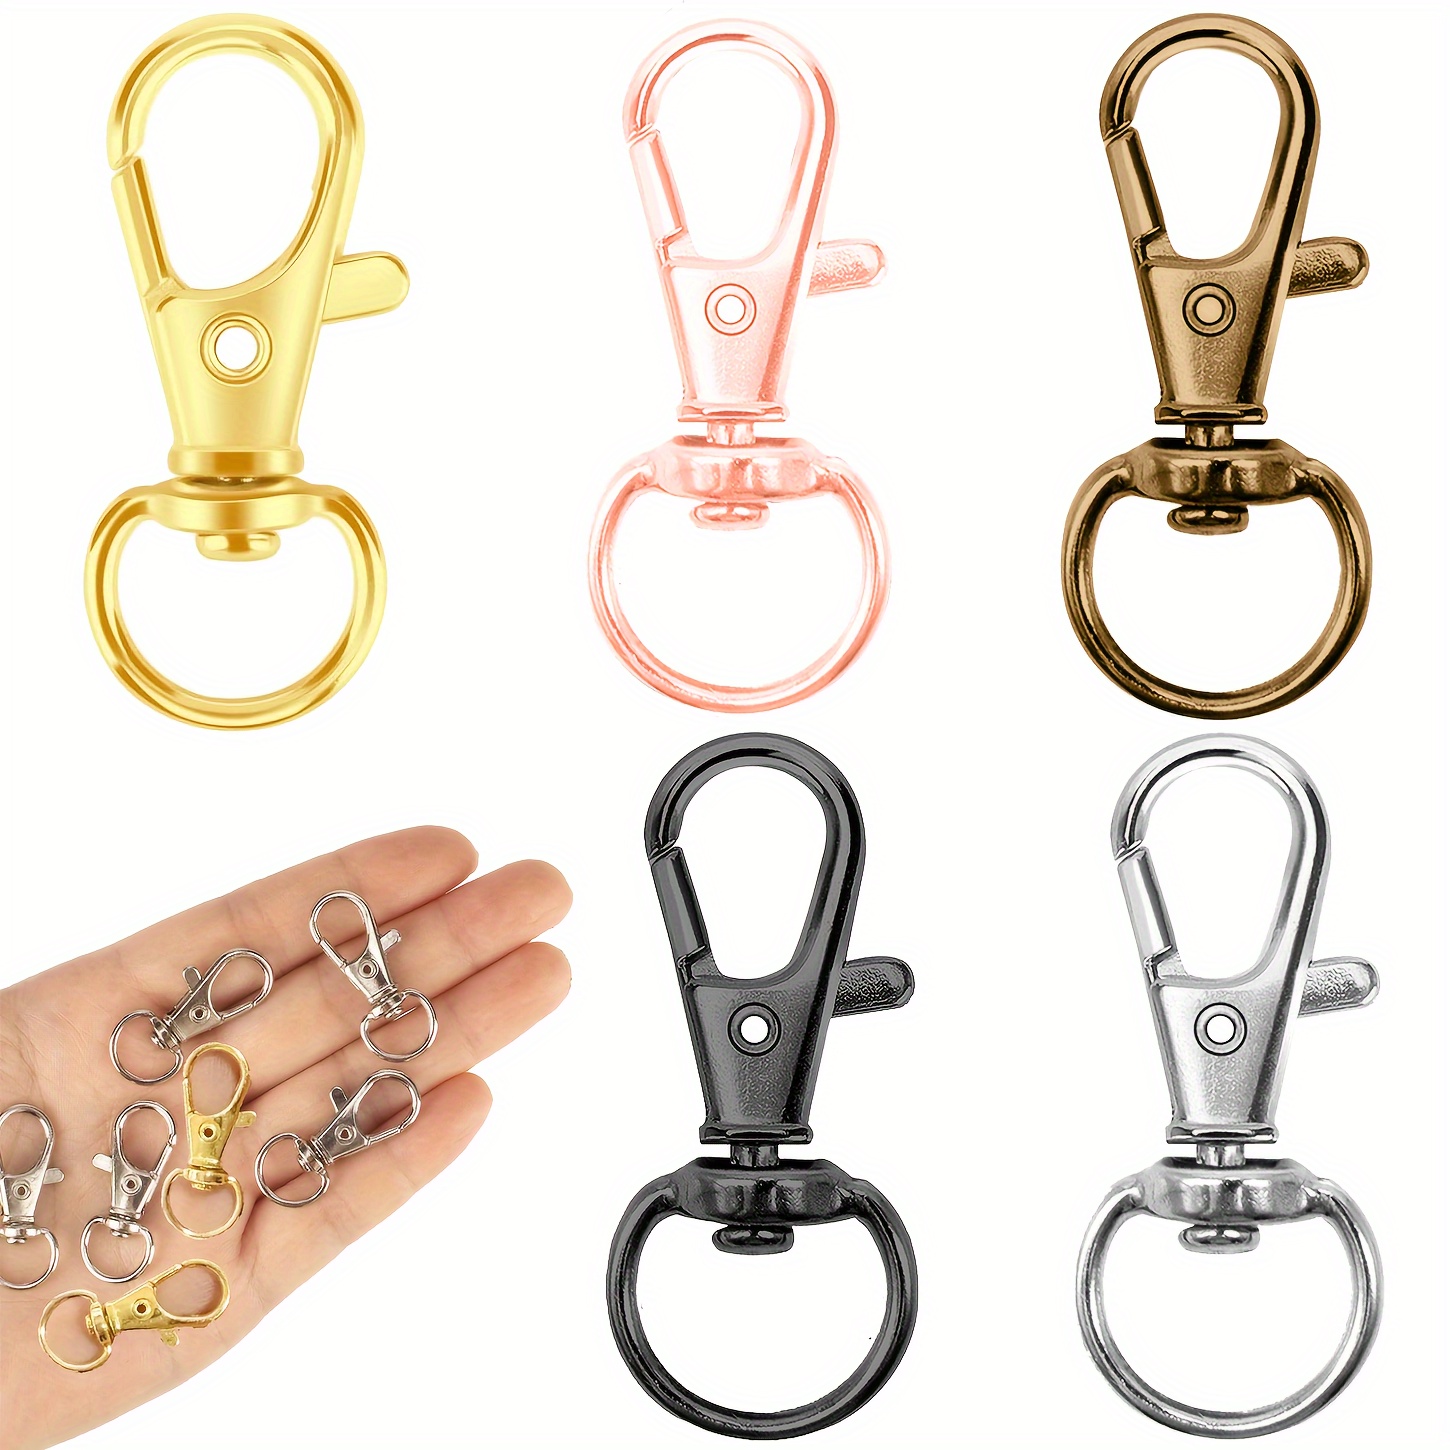 

10pcs Zinc Alloy Swivel Clasps, 35mm Golden Swivel Snap Hooks, Spring Lobster Clasp Clips For Keychain Crafting, Diy Projects, Lanyard, Pet Collars With Full 360° Rotation